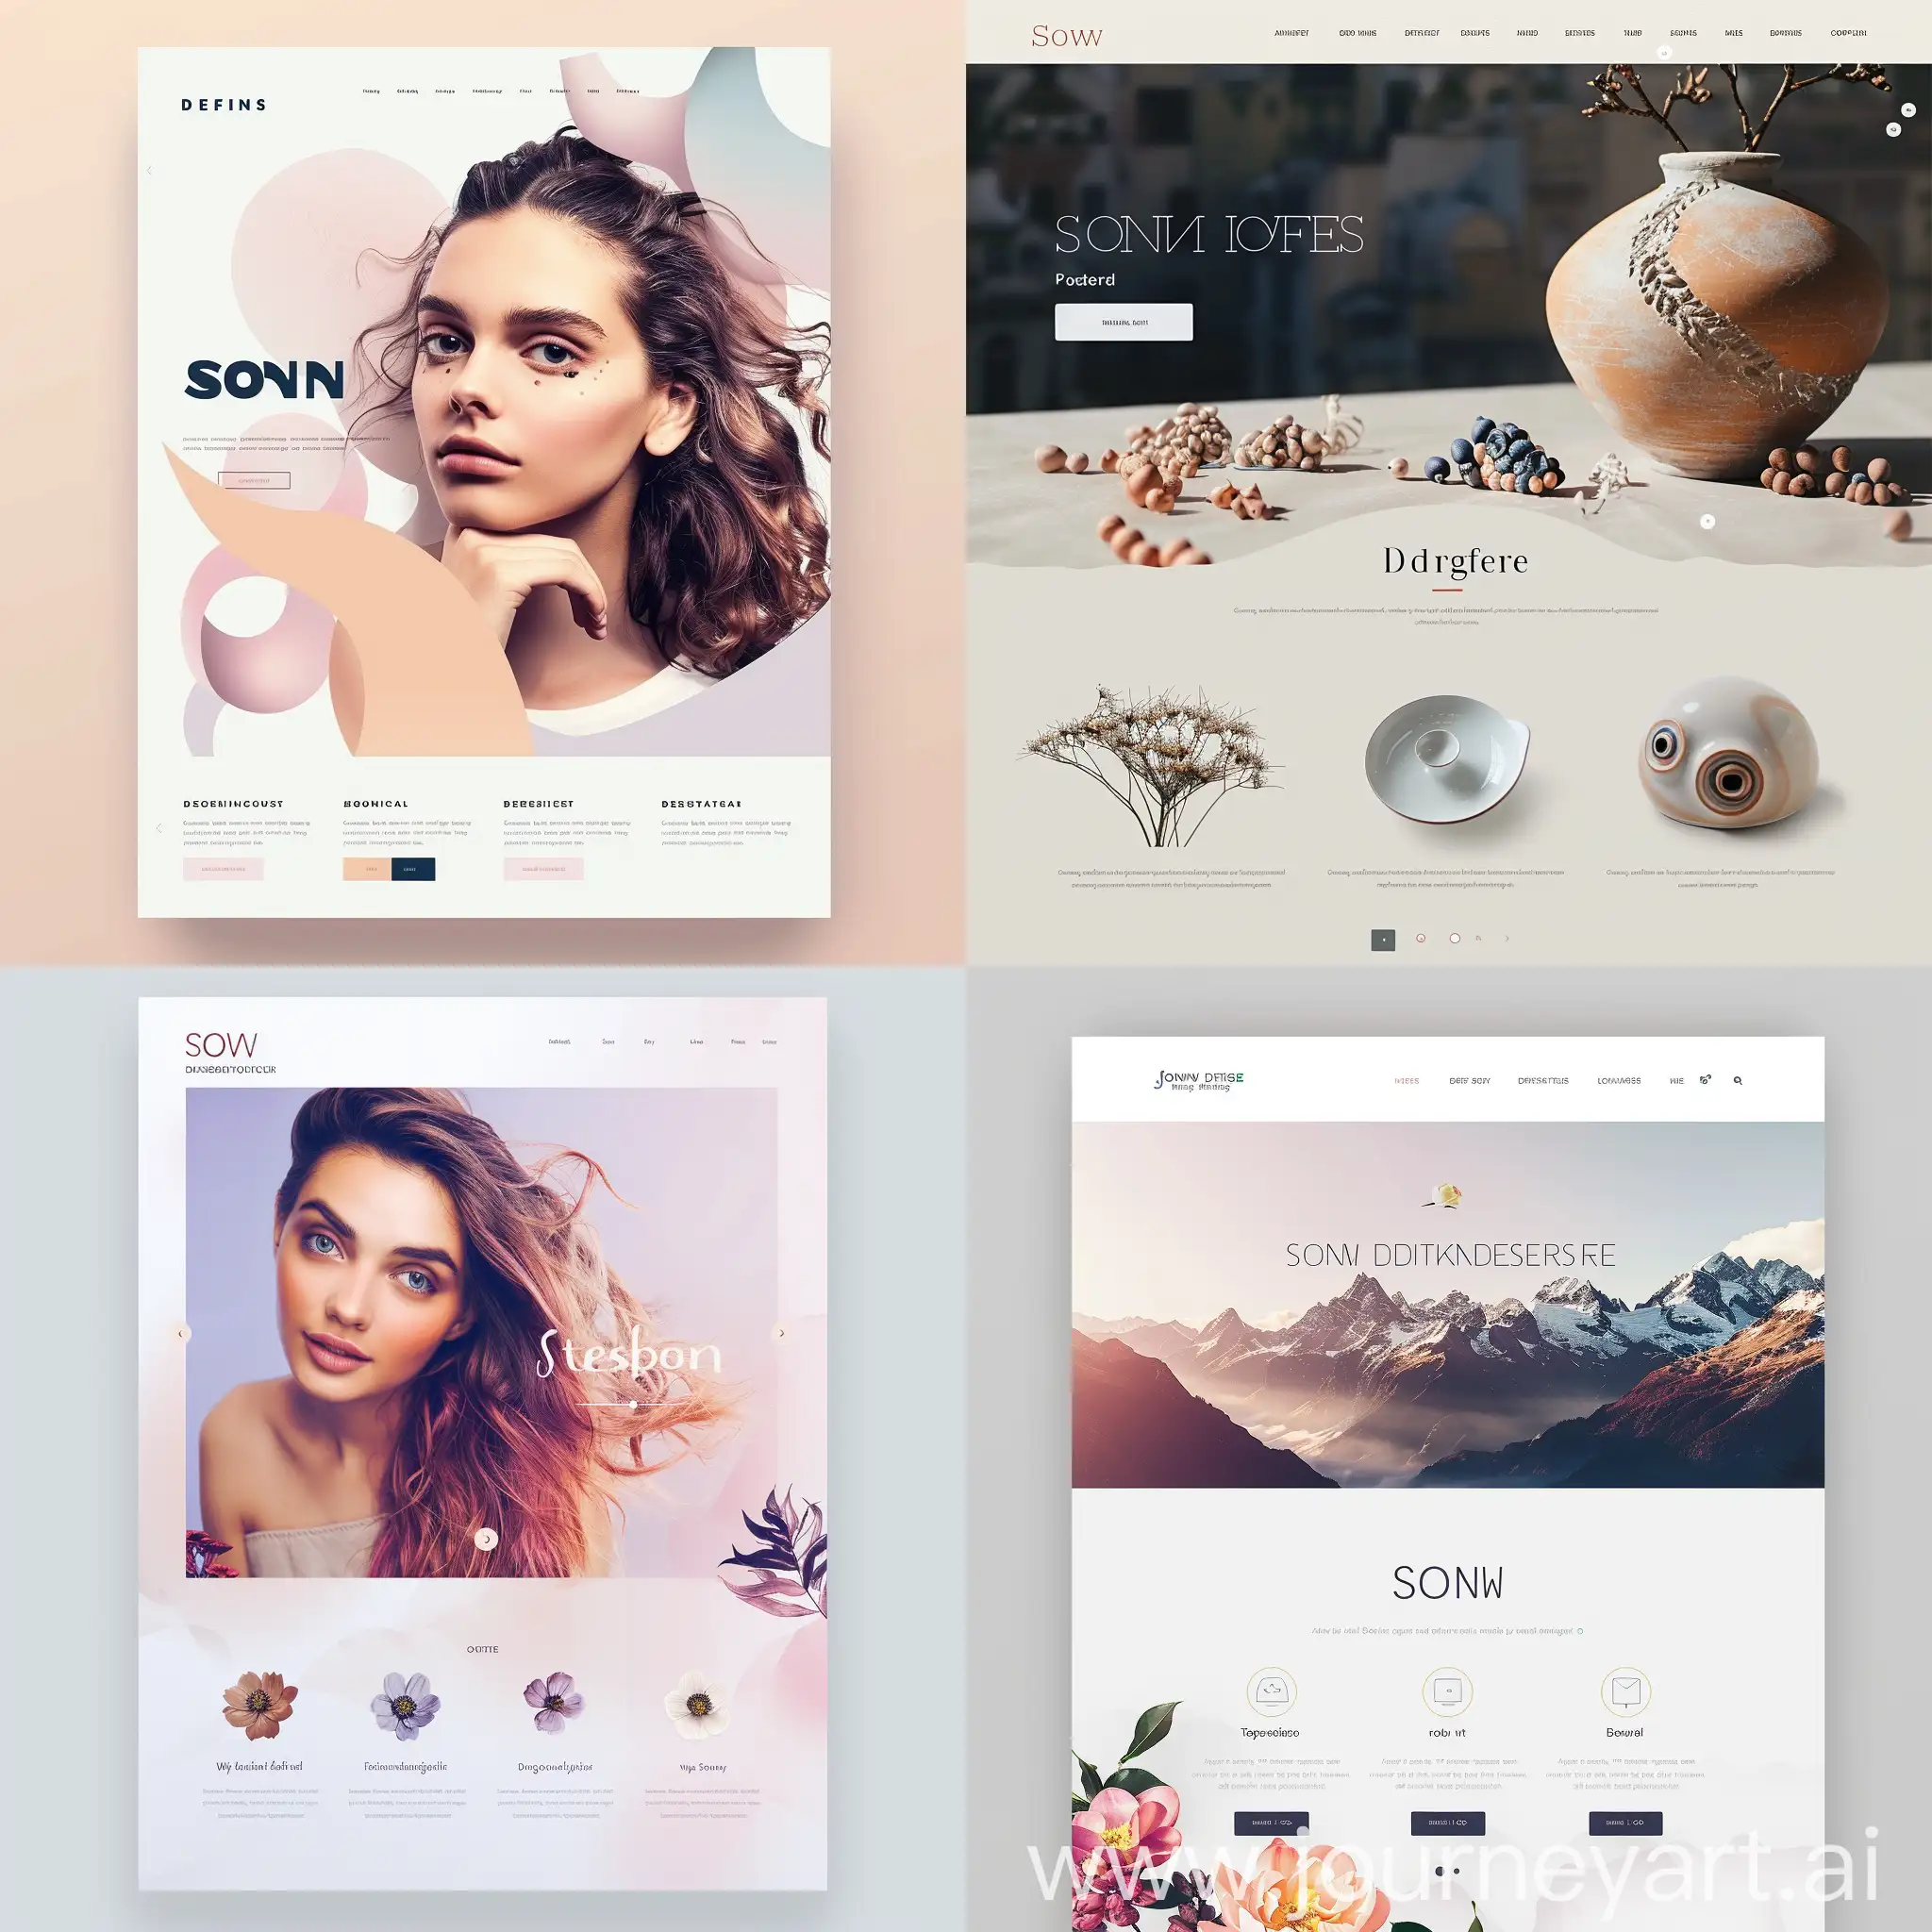 Modern-and-Simple-UI-Soon-Page-for-Graphic-Designer-Portfolio